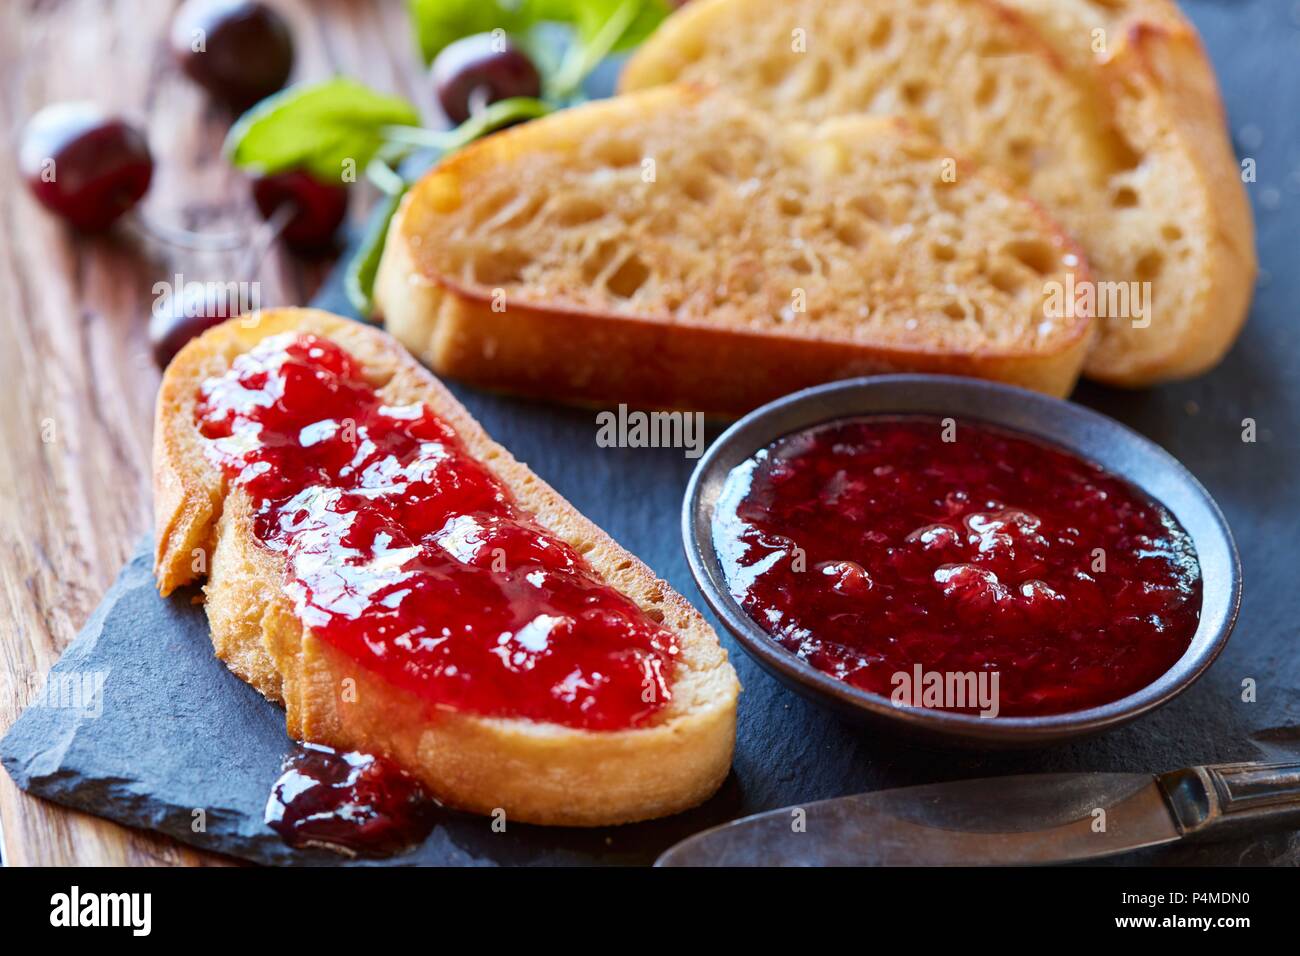 Cherry jam with toasted bread Stock Photo